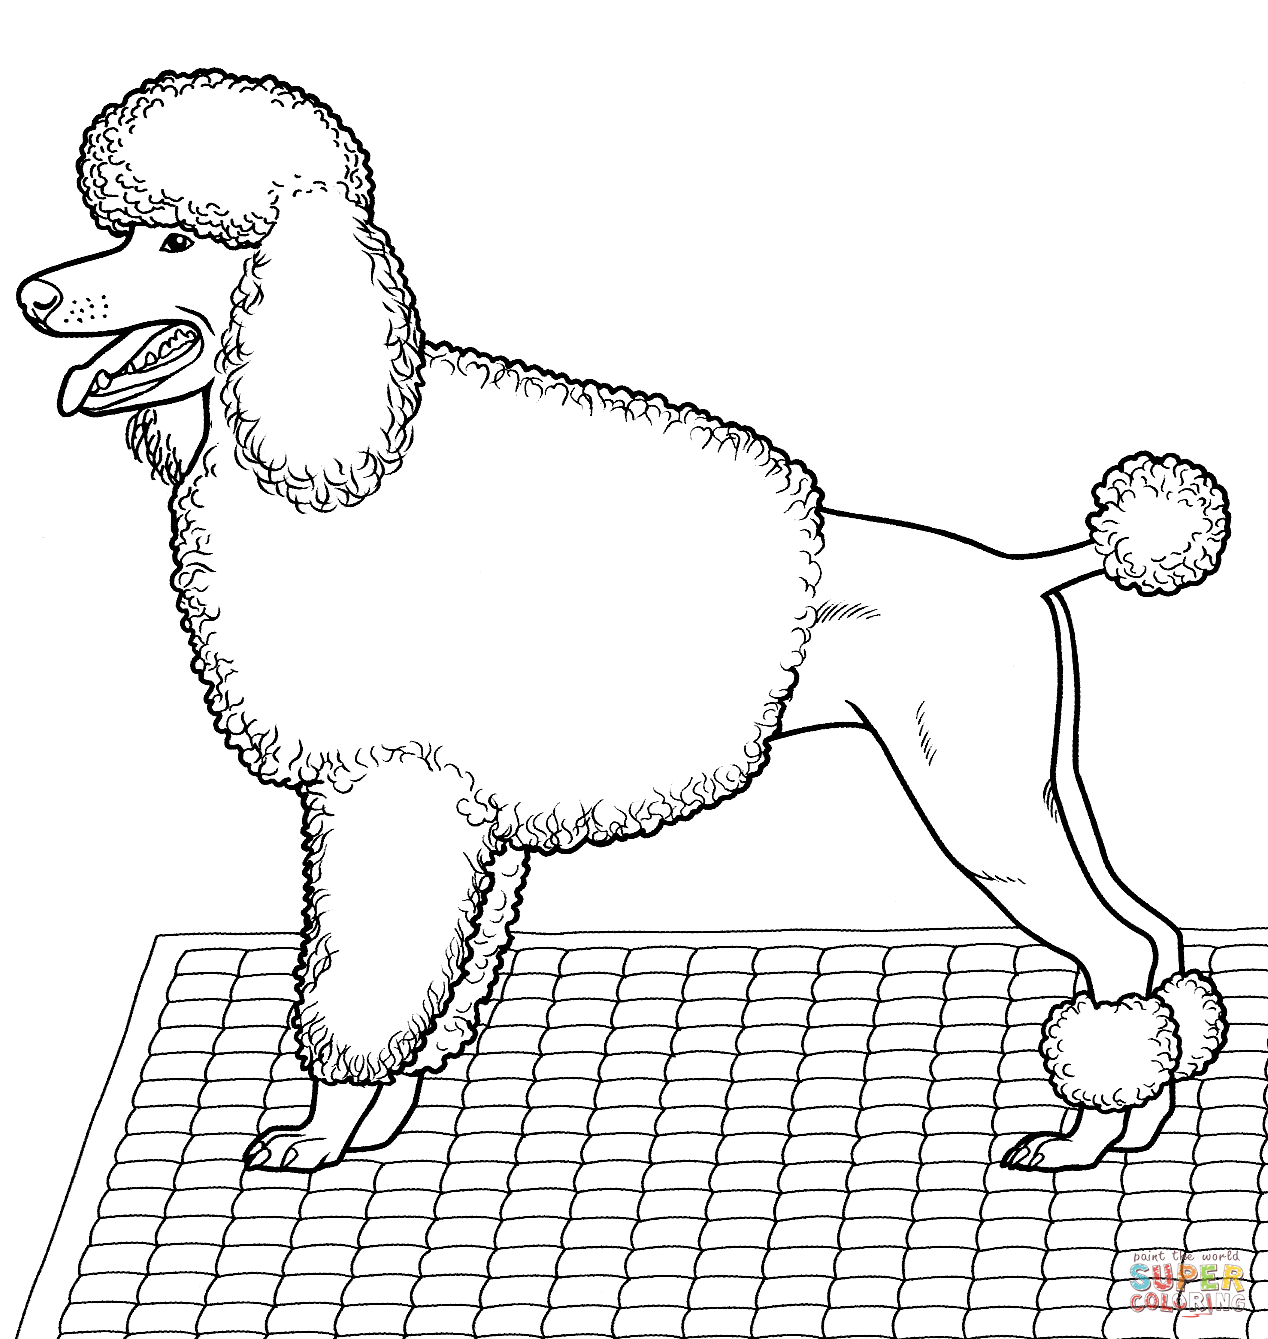 101 Dalmatians Poodle Coloring Pages - Coloring Pages For All Ages